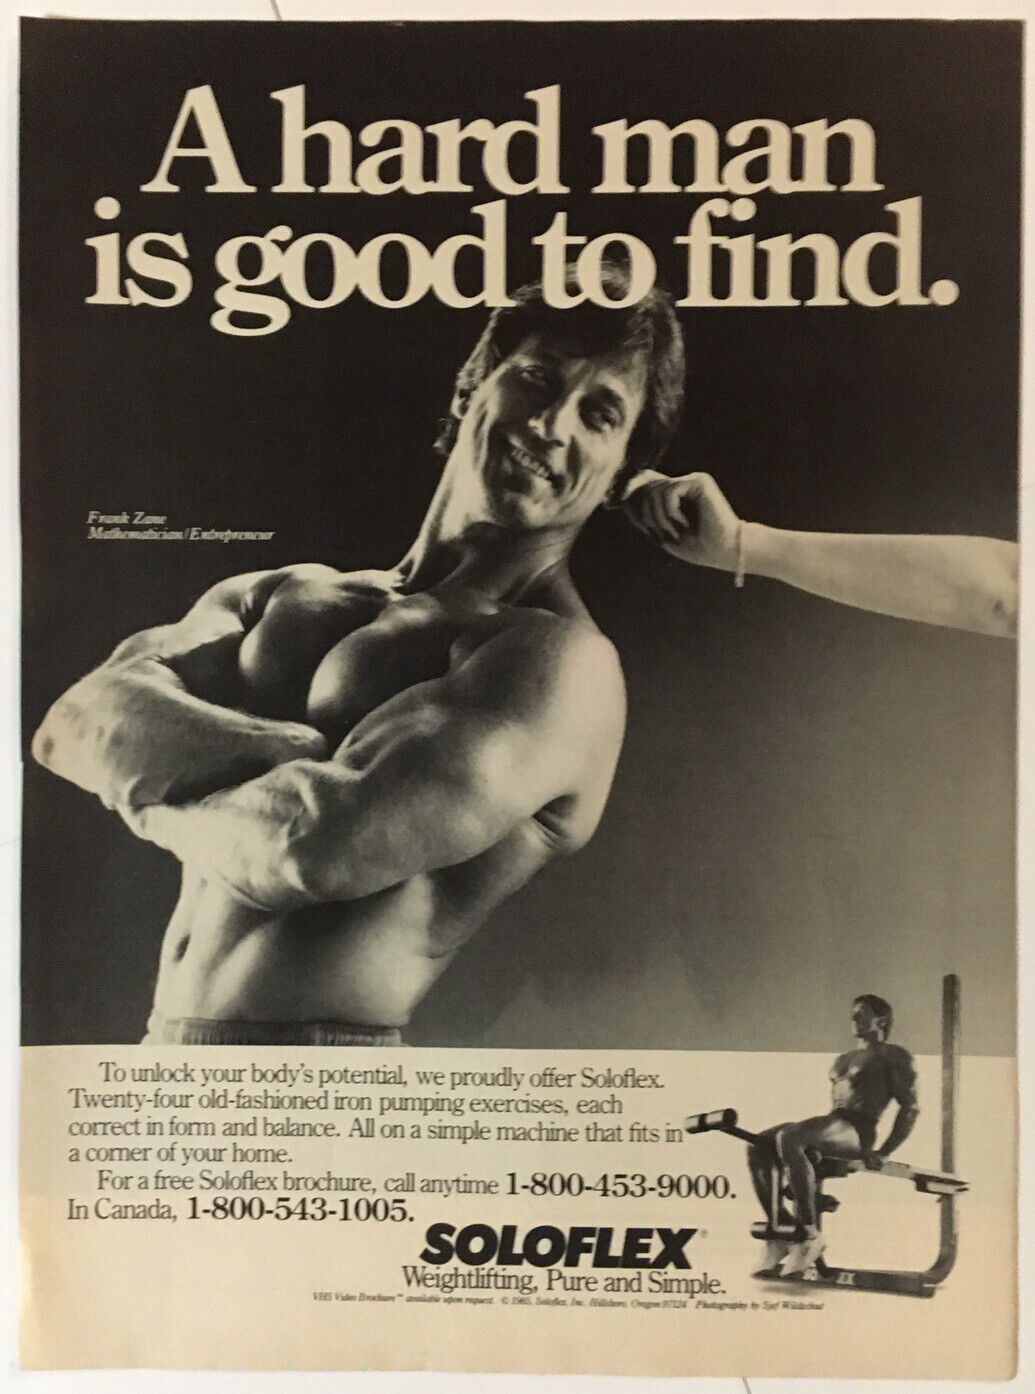 Frank Zane Soloflex A Hard Man Is Good To Find 1985 Vintage Print Ad 8x11 Inches